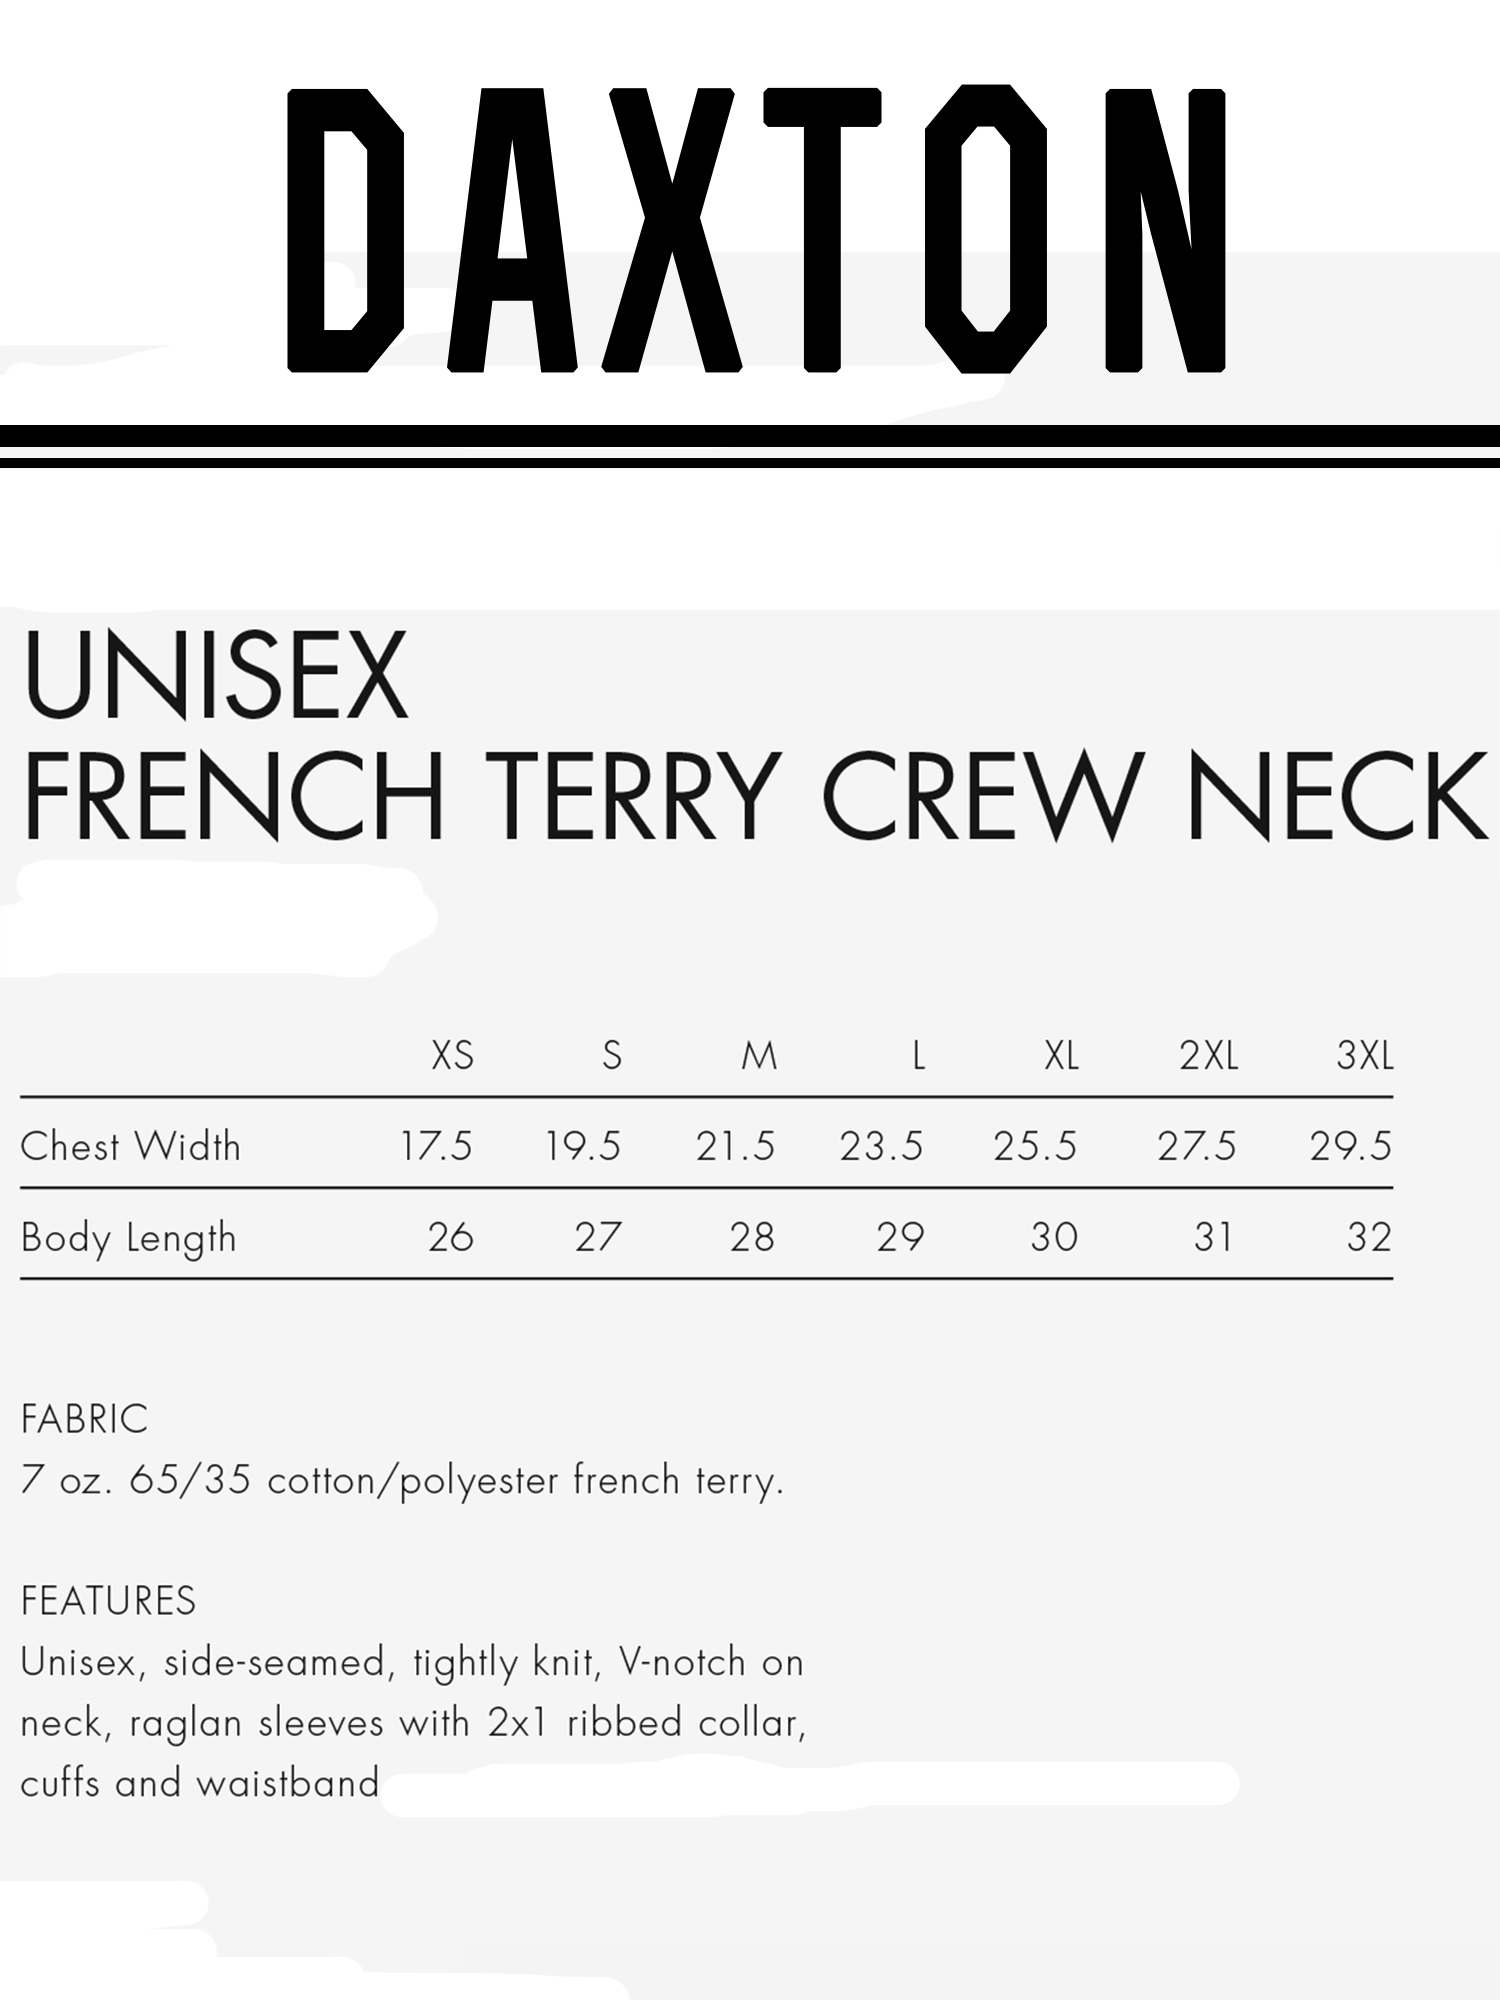 Daxton San Francisco Sweatshirt Athletic Pullover Crewneck French Terry Fabric, HCharcoal Sweatshirt White Letters, XS - image 2 of 3